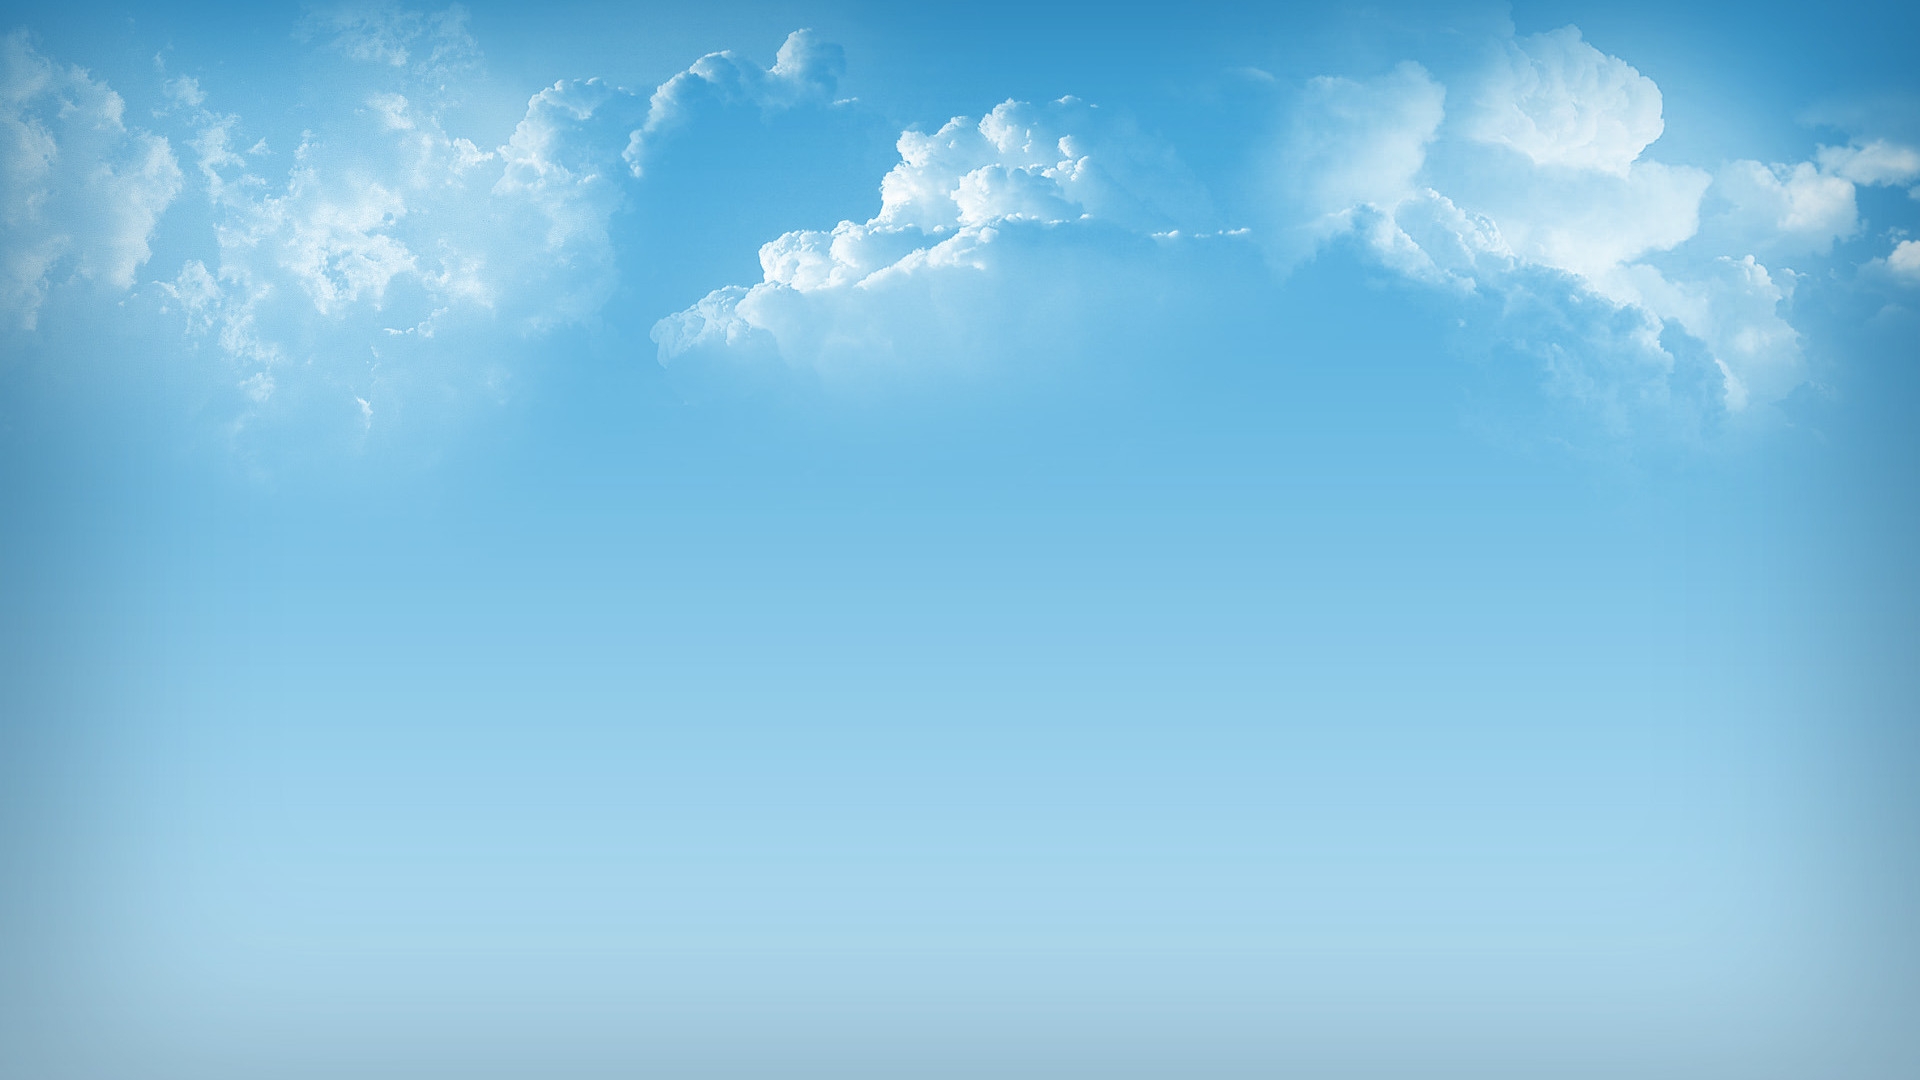 Simple Clouds for 1920 x 1080 HDTV 1080p resolution